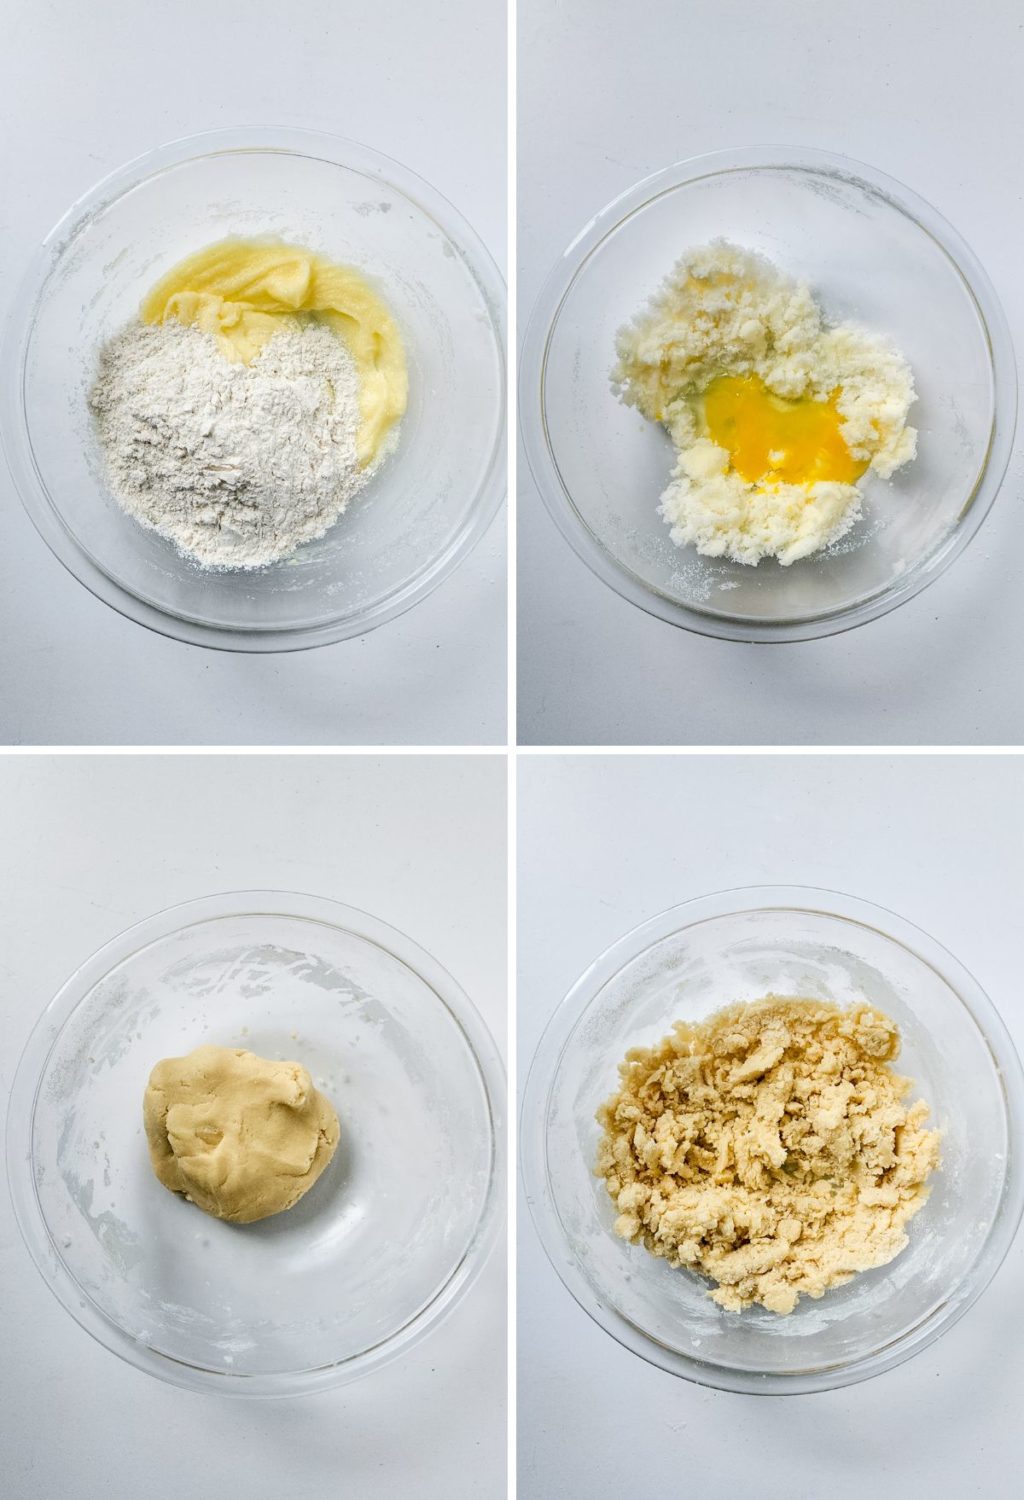 Four pictures showing the ingredients for a recipe.